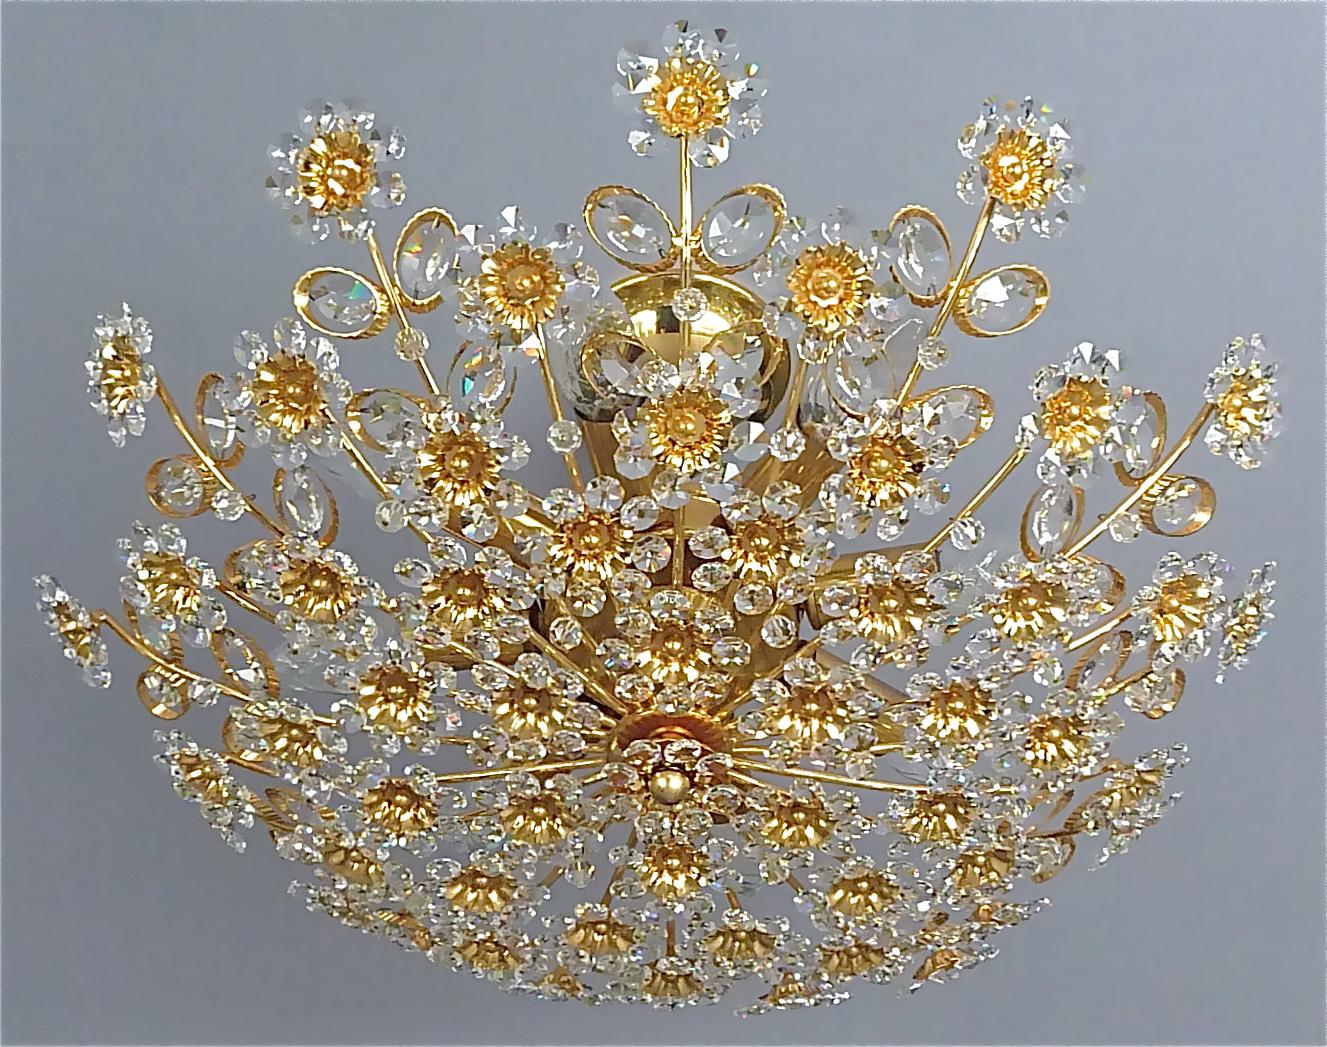 This is no. 1 of 3 available.
Large round gilt brass metal crystal glass floral flush mount chandelier made by Palwa, Germany, circa 1960-1970, documented in the Palwa sales catalog, labeled with Palwa company decal with model number. The gorgeous